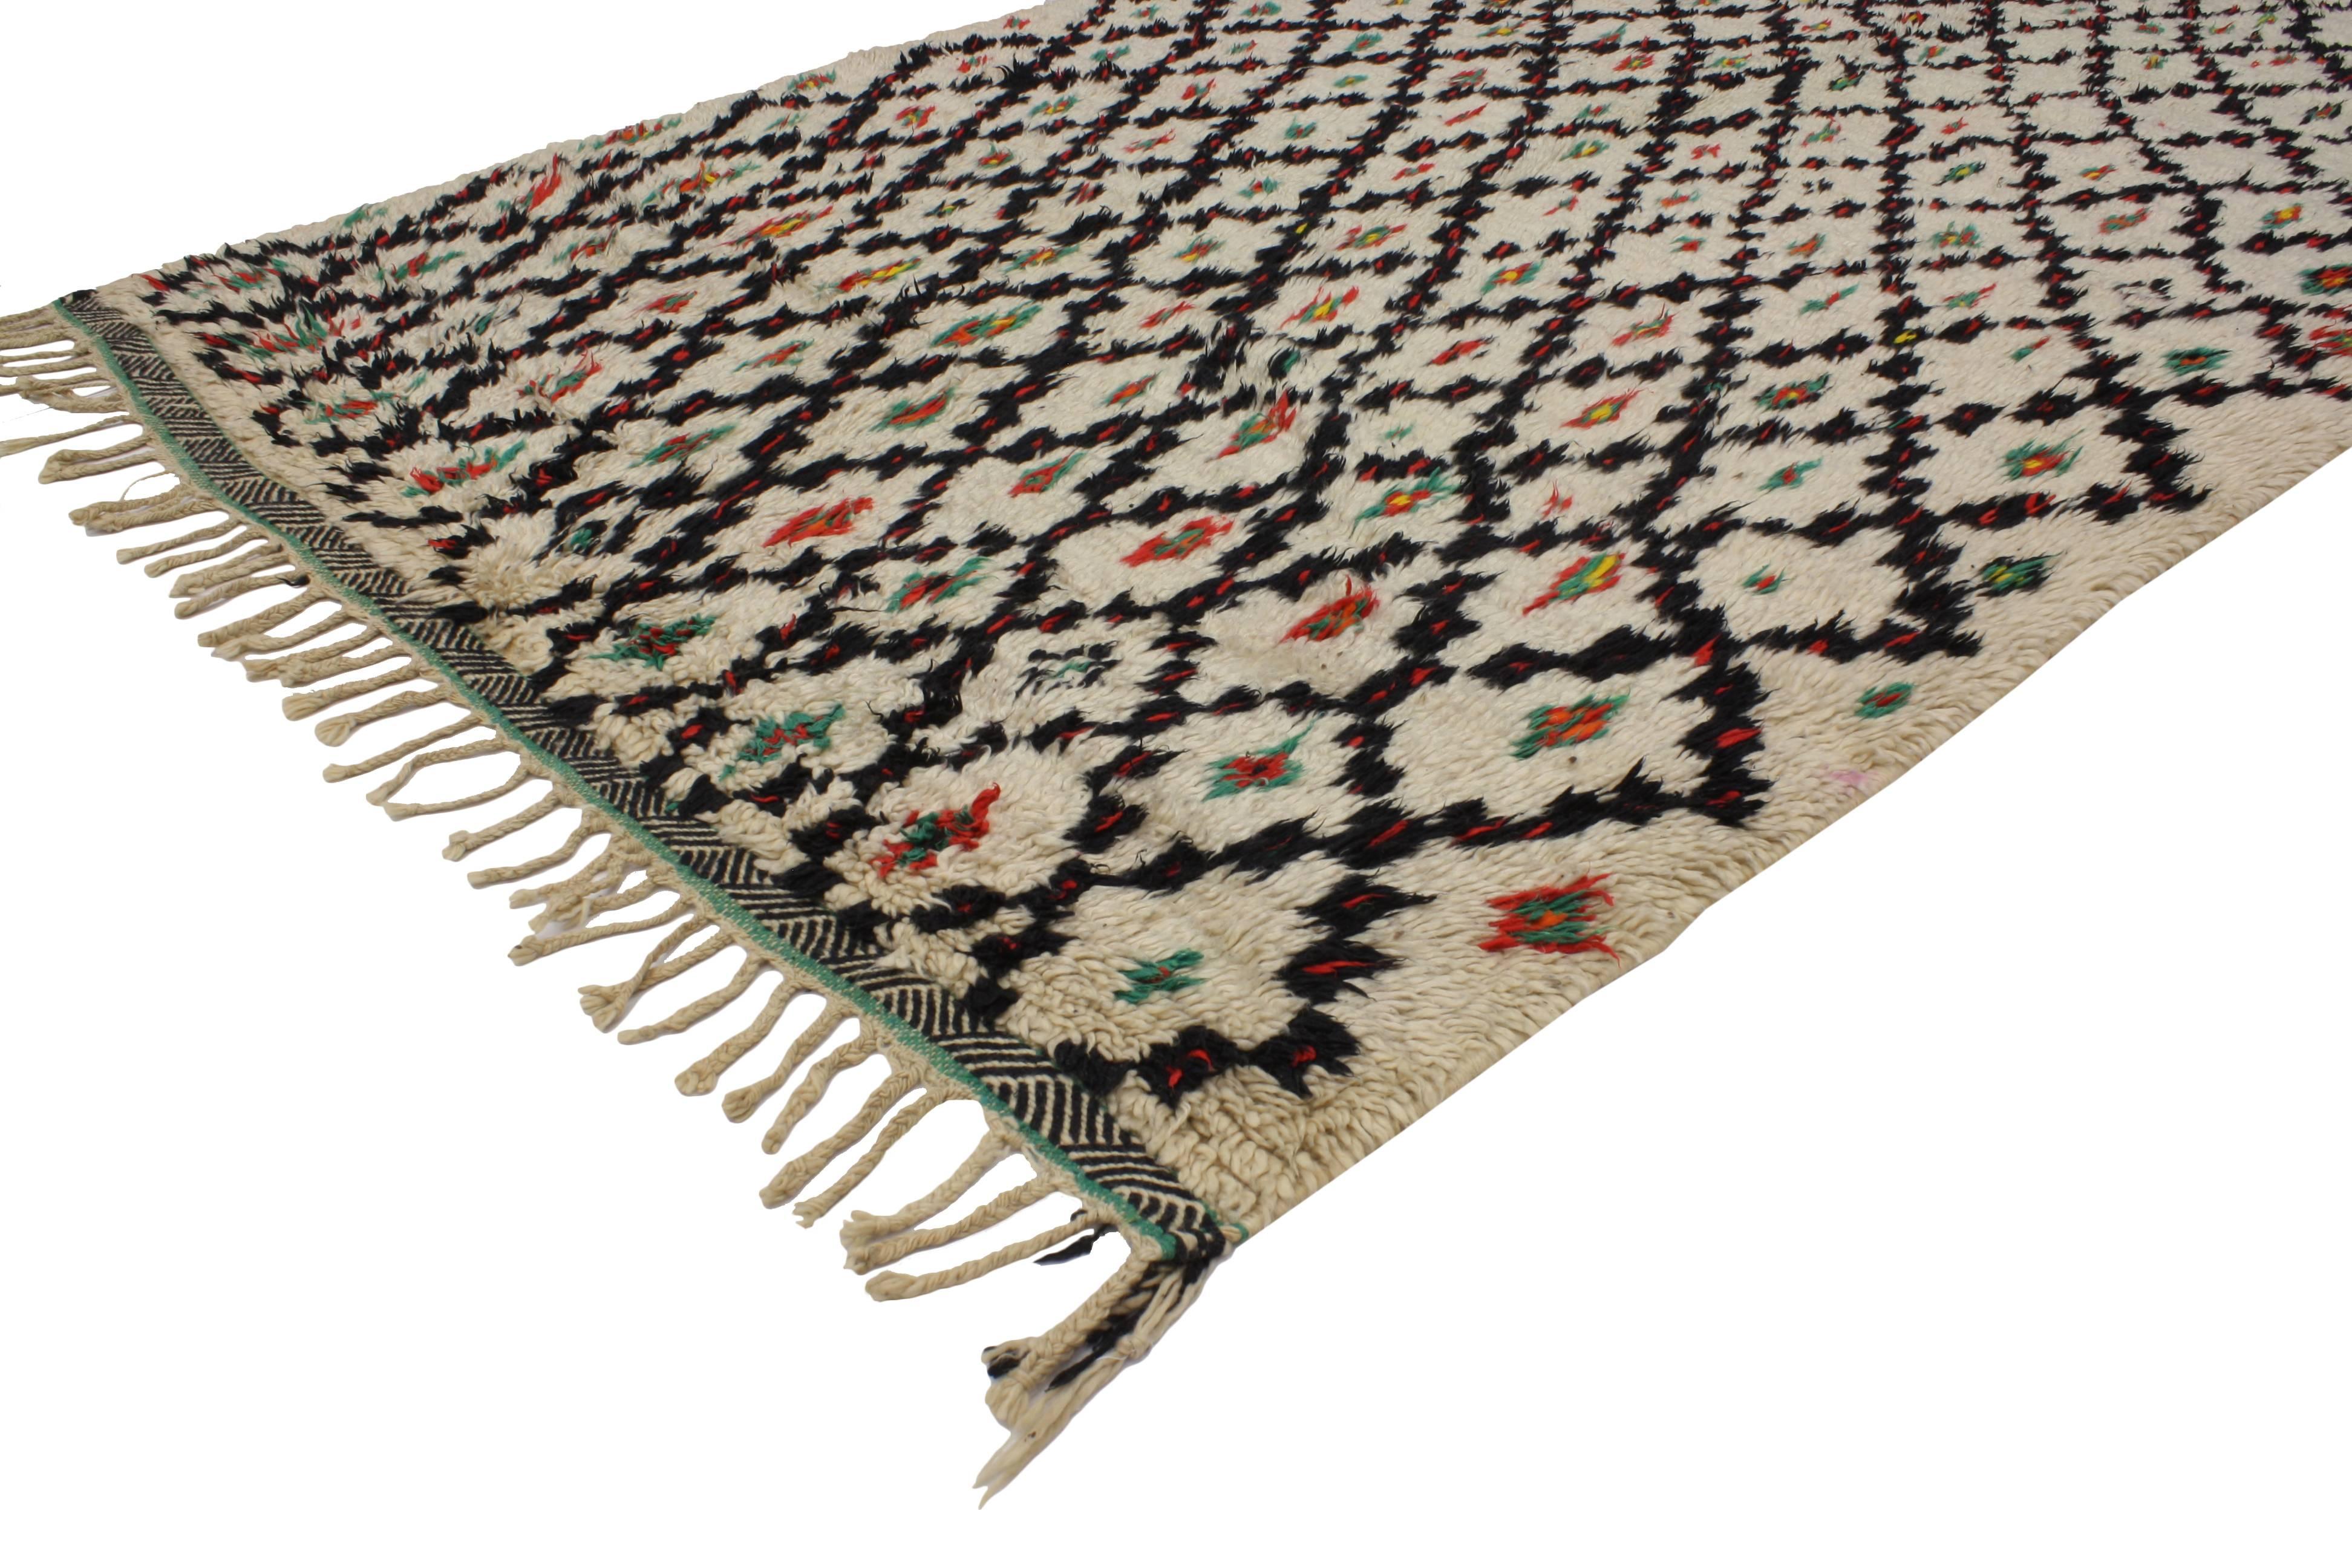 20464 Vintage Berber Moroccan Rug with Modern Tribal Style, Azilal Rug. Add a Boho Chic vibe to your home with this vintage Berber Moroccan rug featuring a modern tribal style. Made in Azilal from the High Atlas Mountains of Morocco. A vanilla-ivory